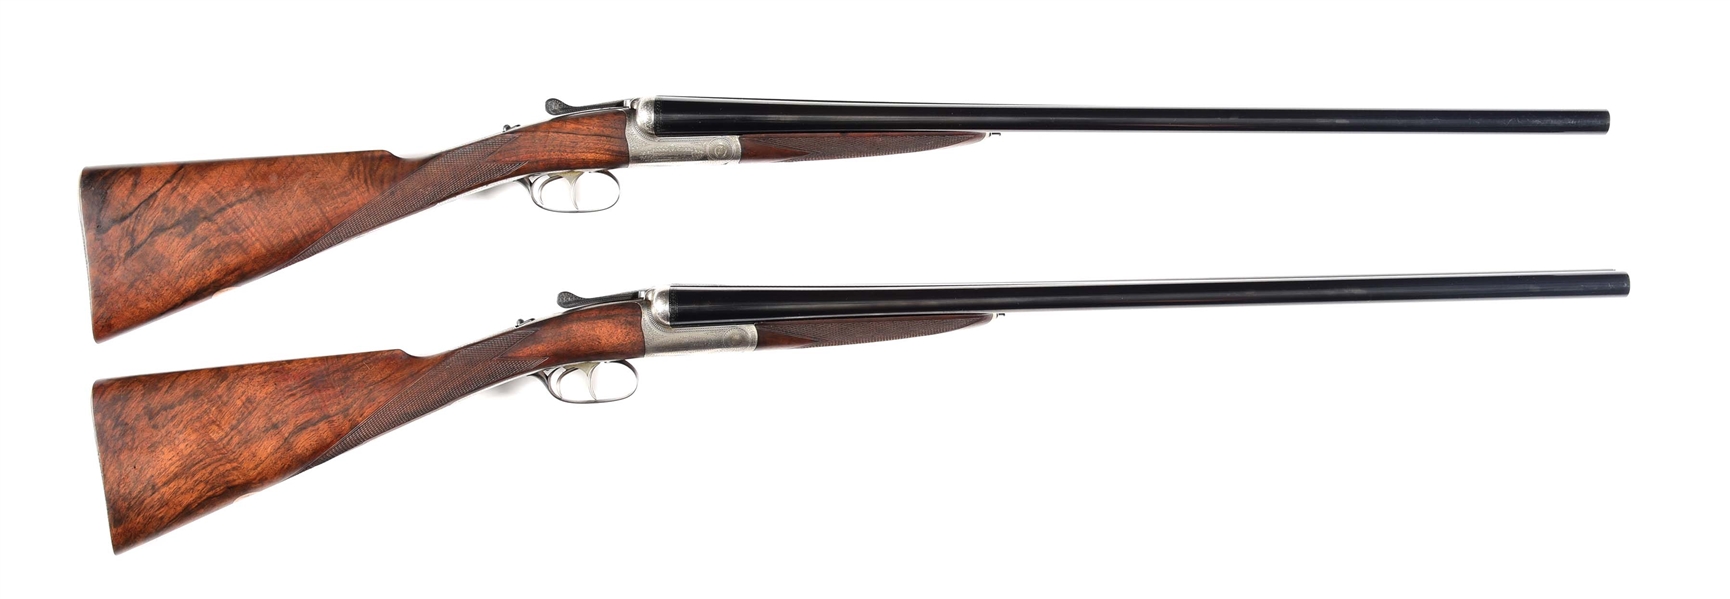 (C) PAIR OF SIDE BY SIDE ROUND BODY SHOTGUNS BY JAMES MACNAUGHTON & SONS, SLEEVED BY DICKSON.